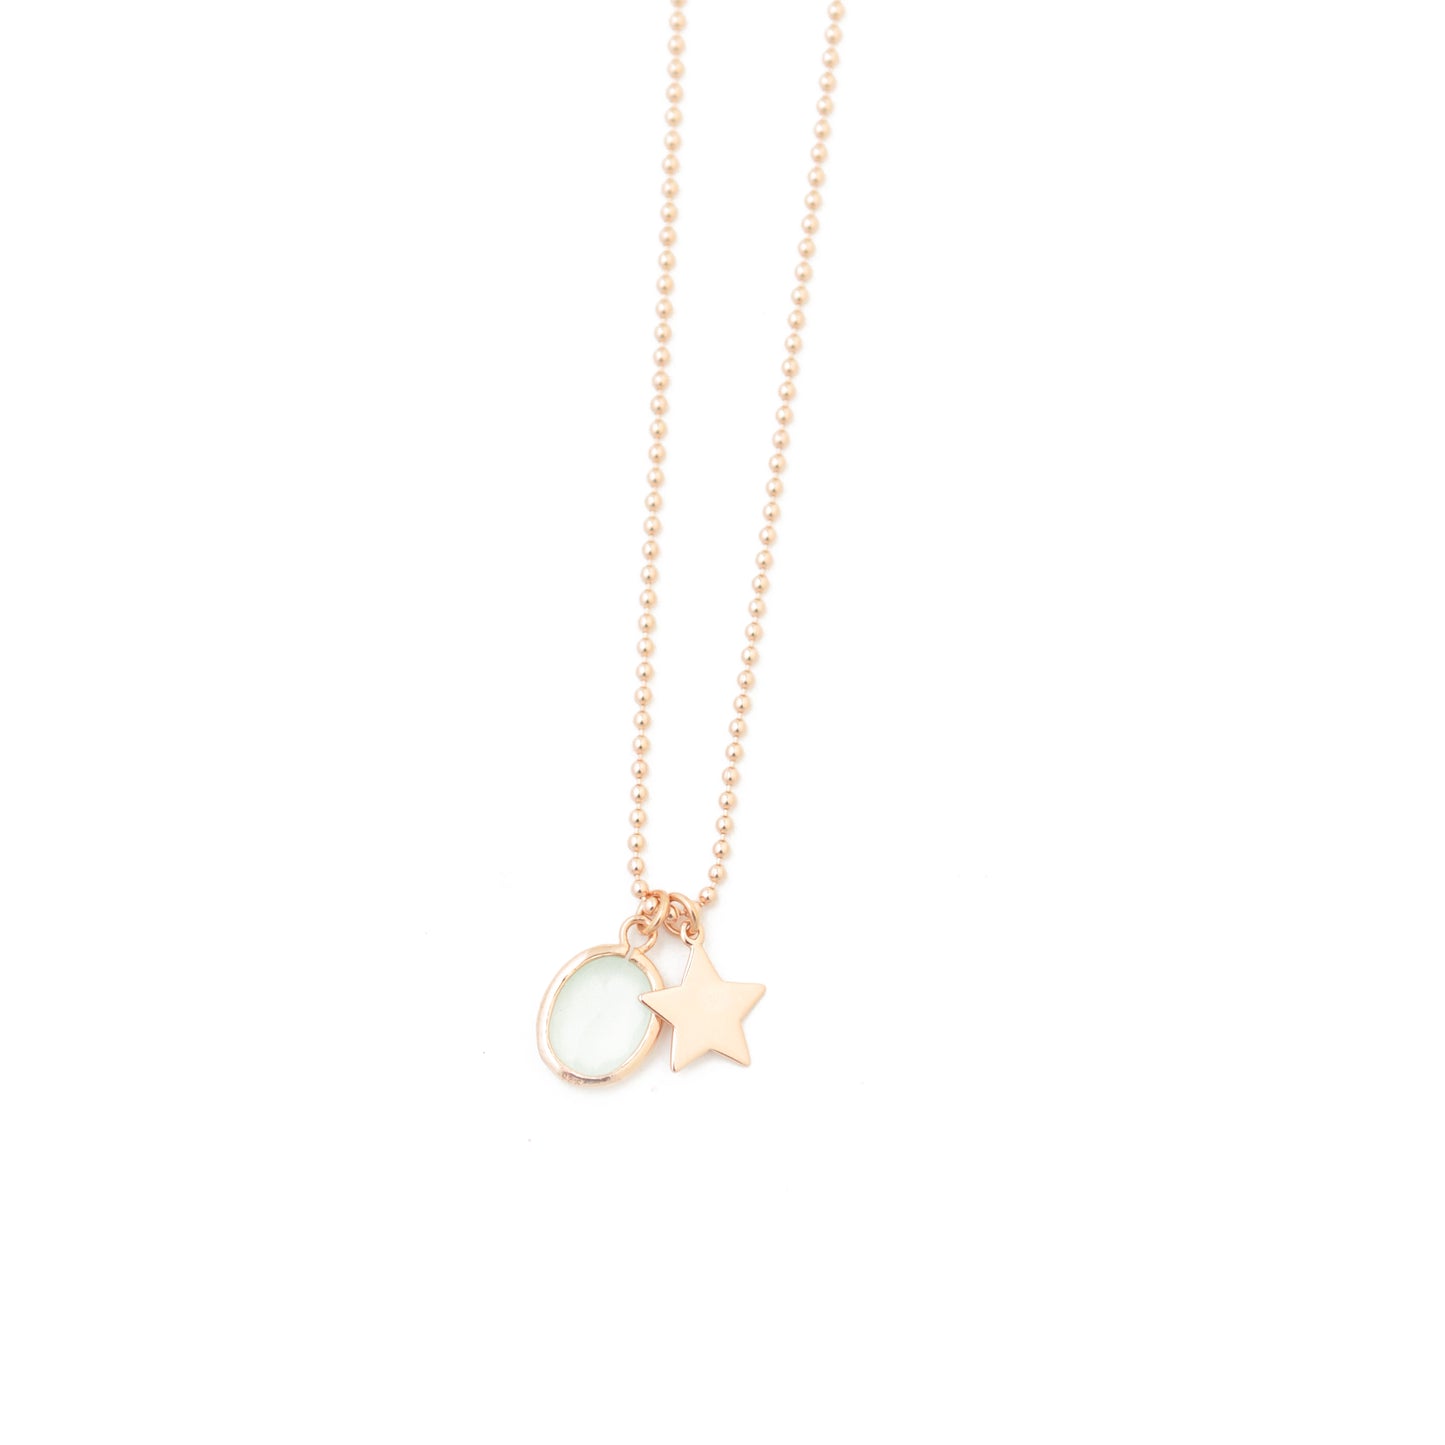 Star Necklace - Little Star - 925 Sterling Silver - 42 cm